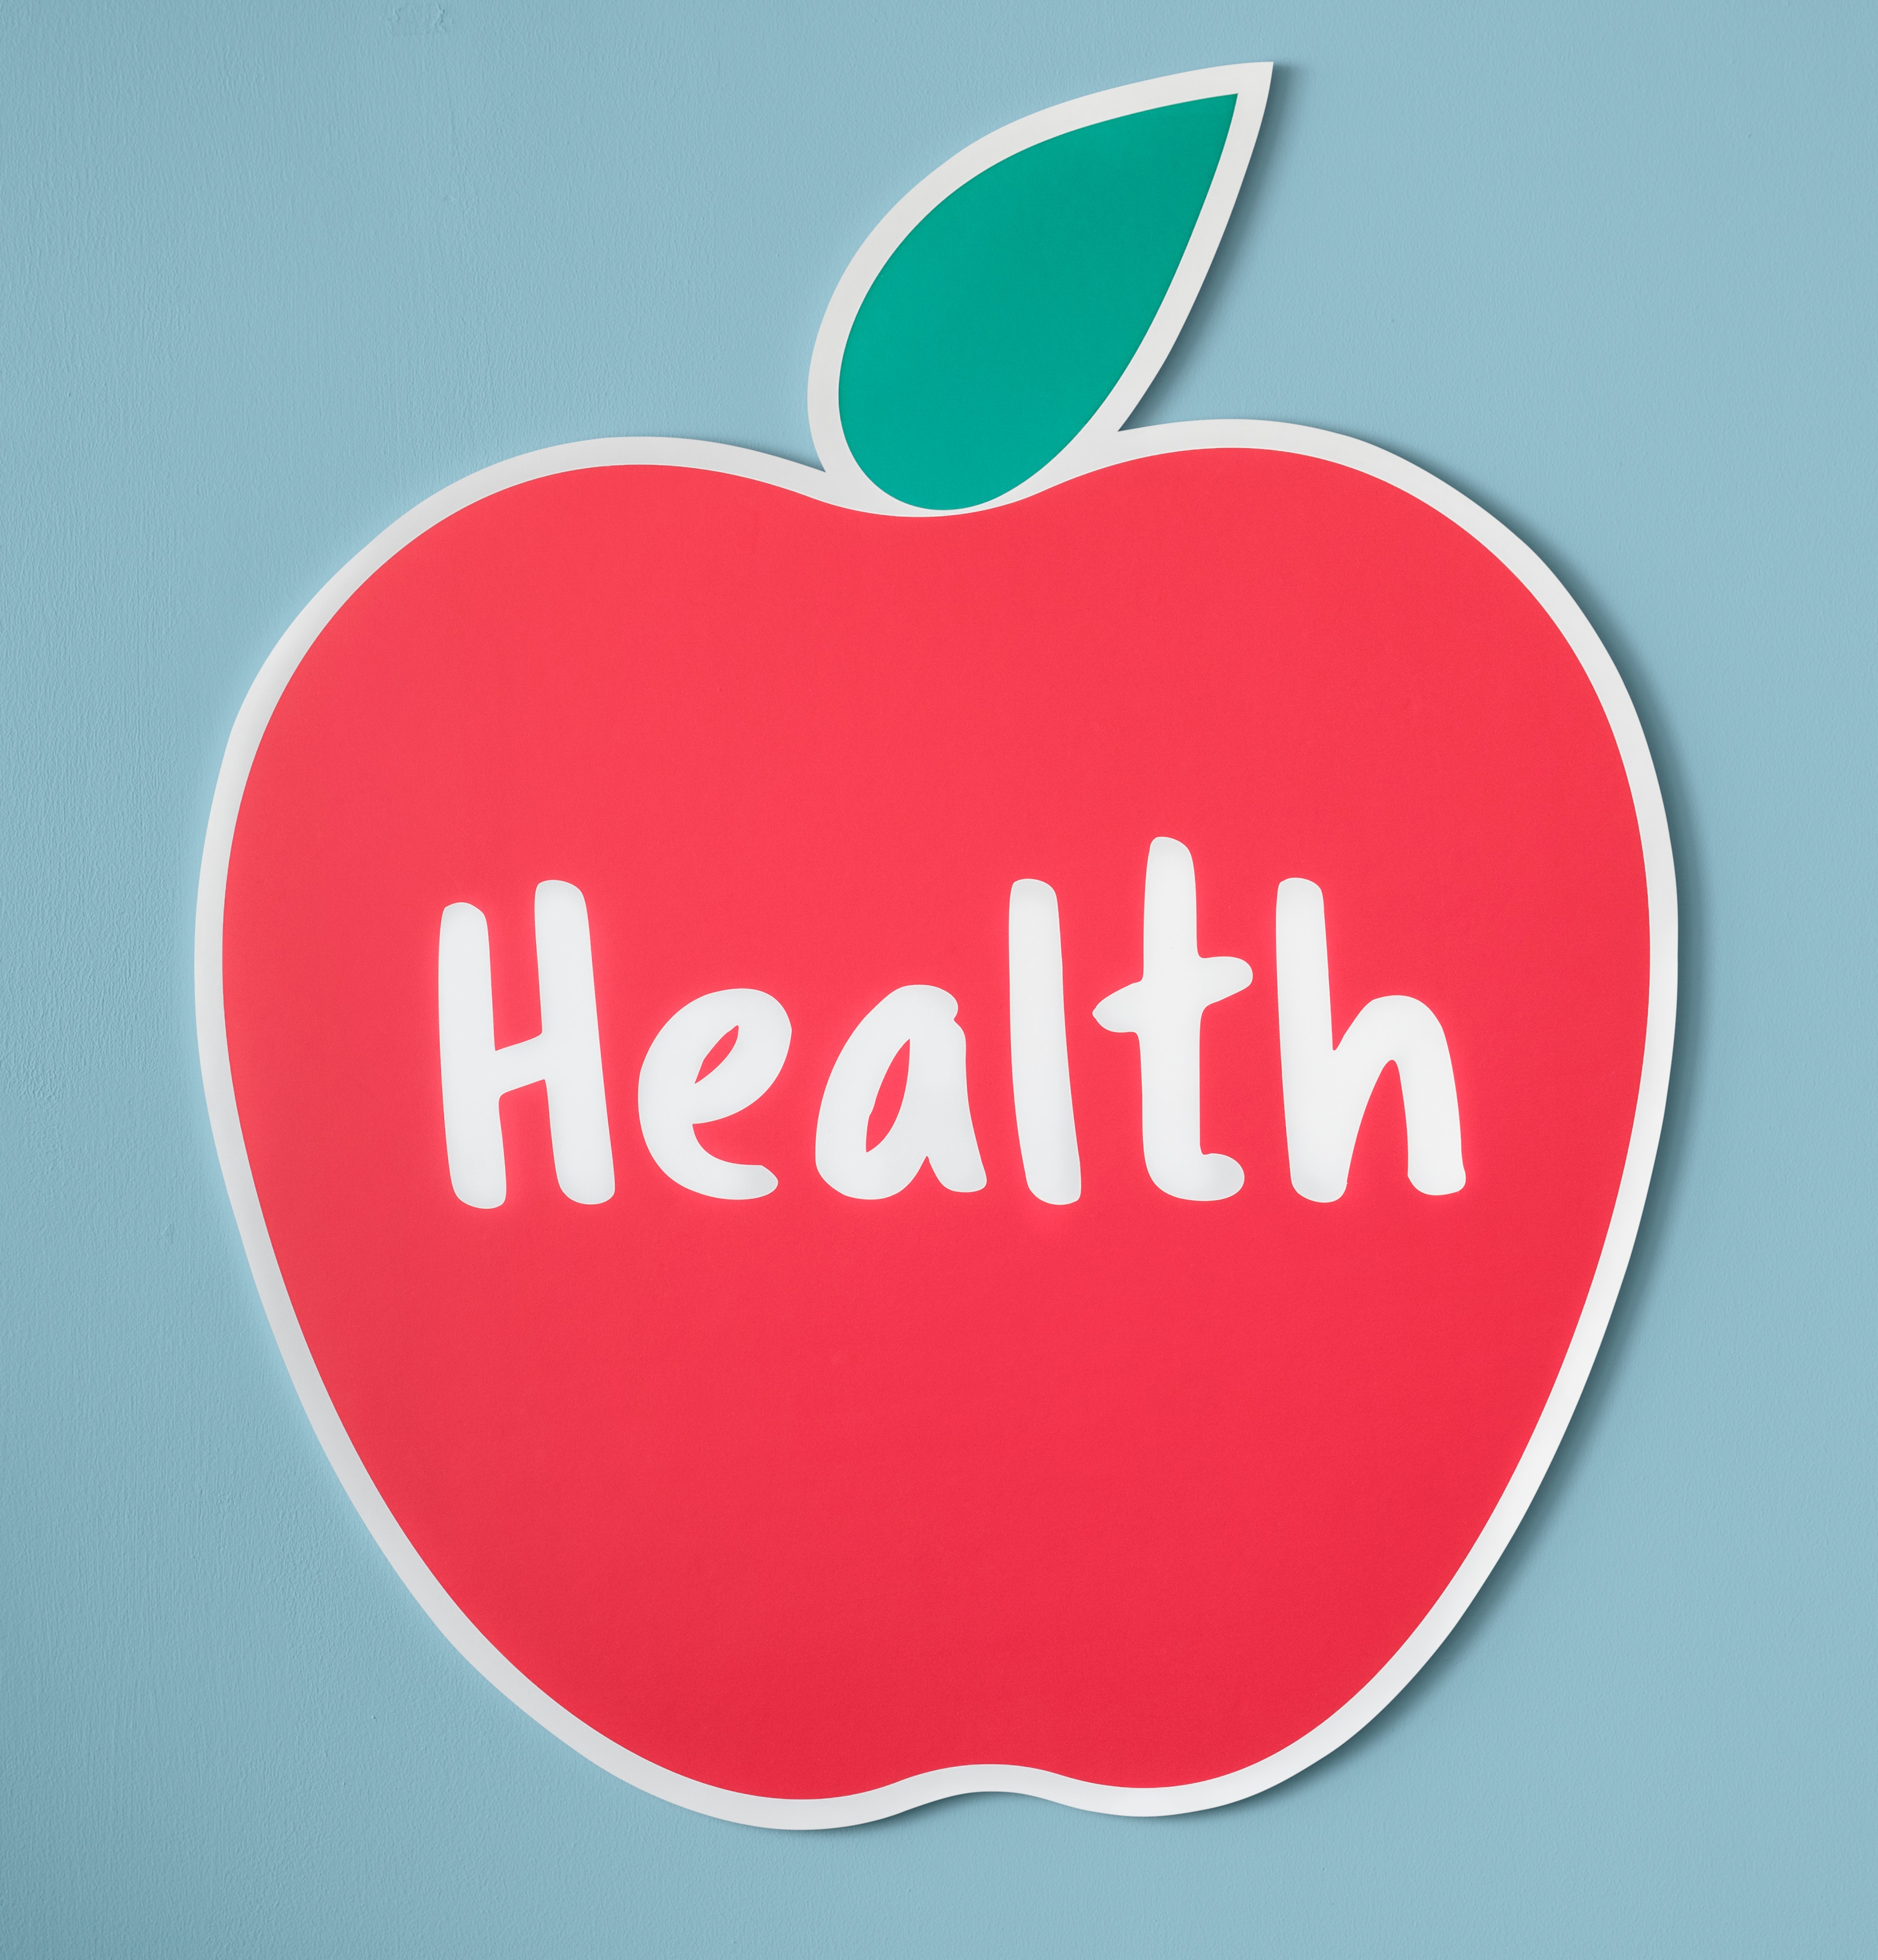 Red apple with word "health" inside